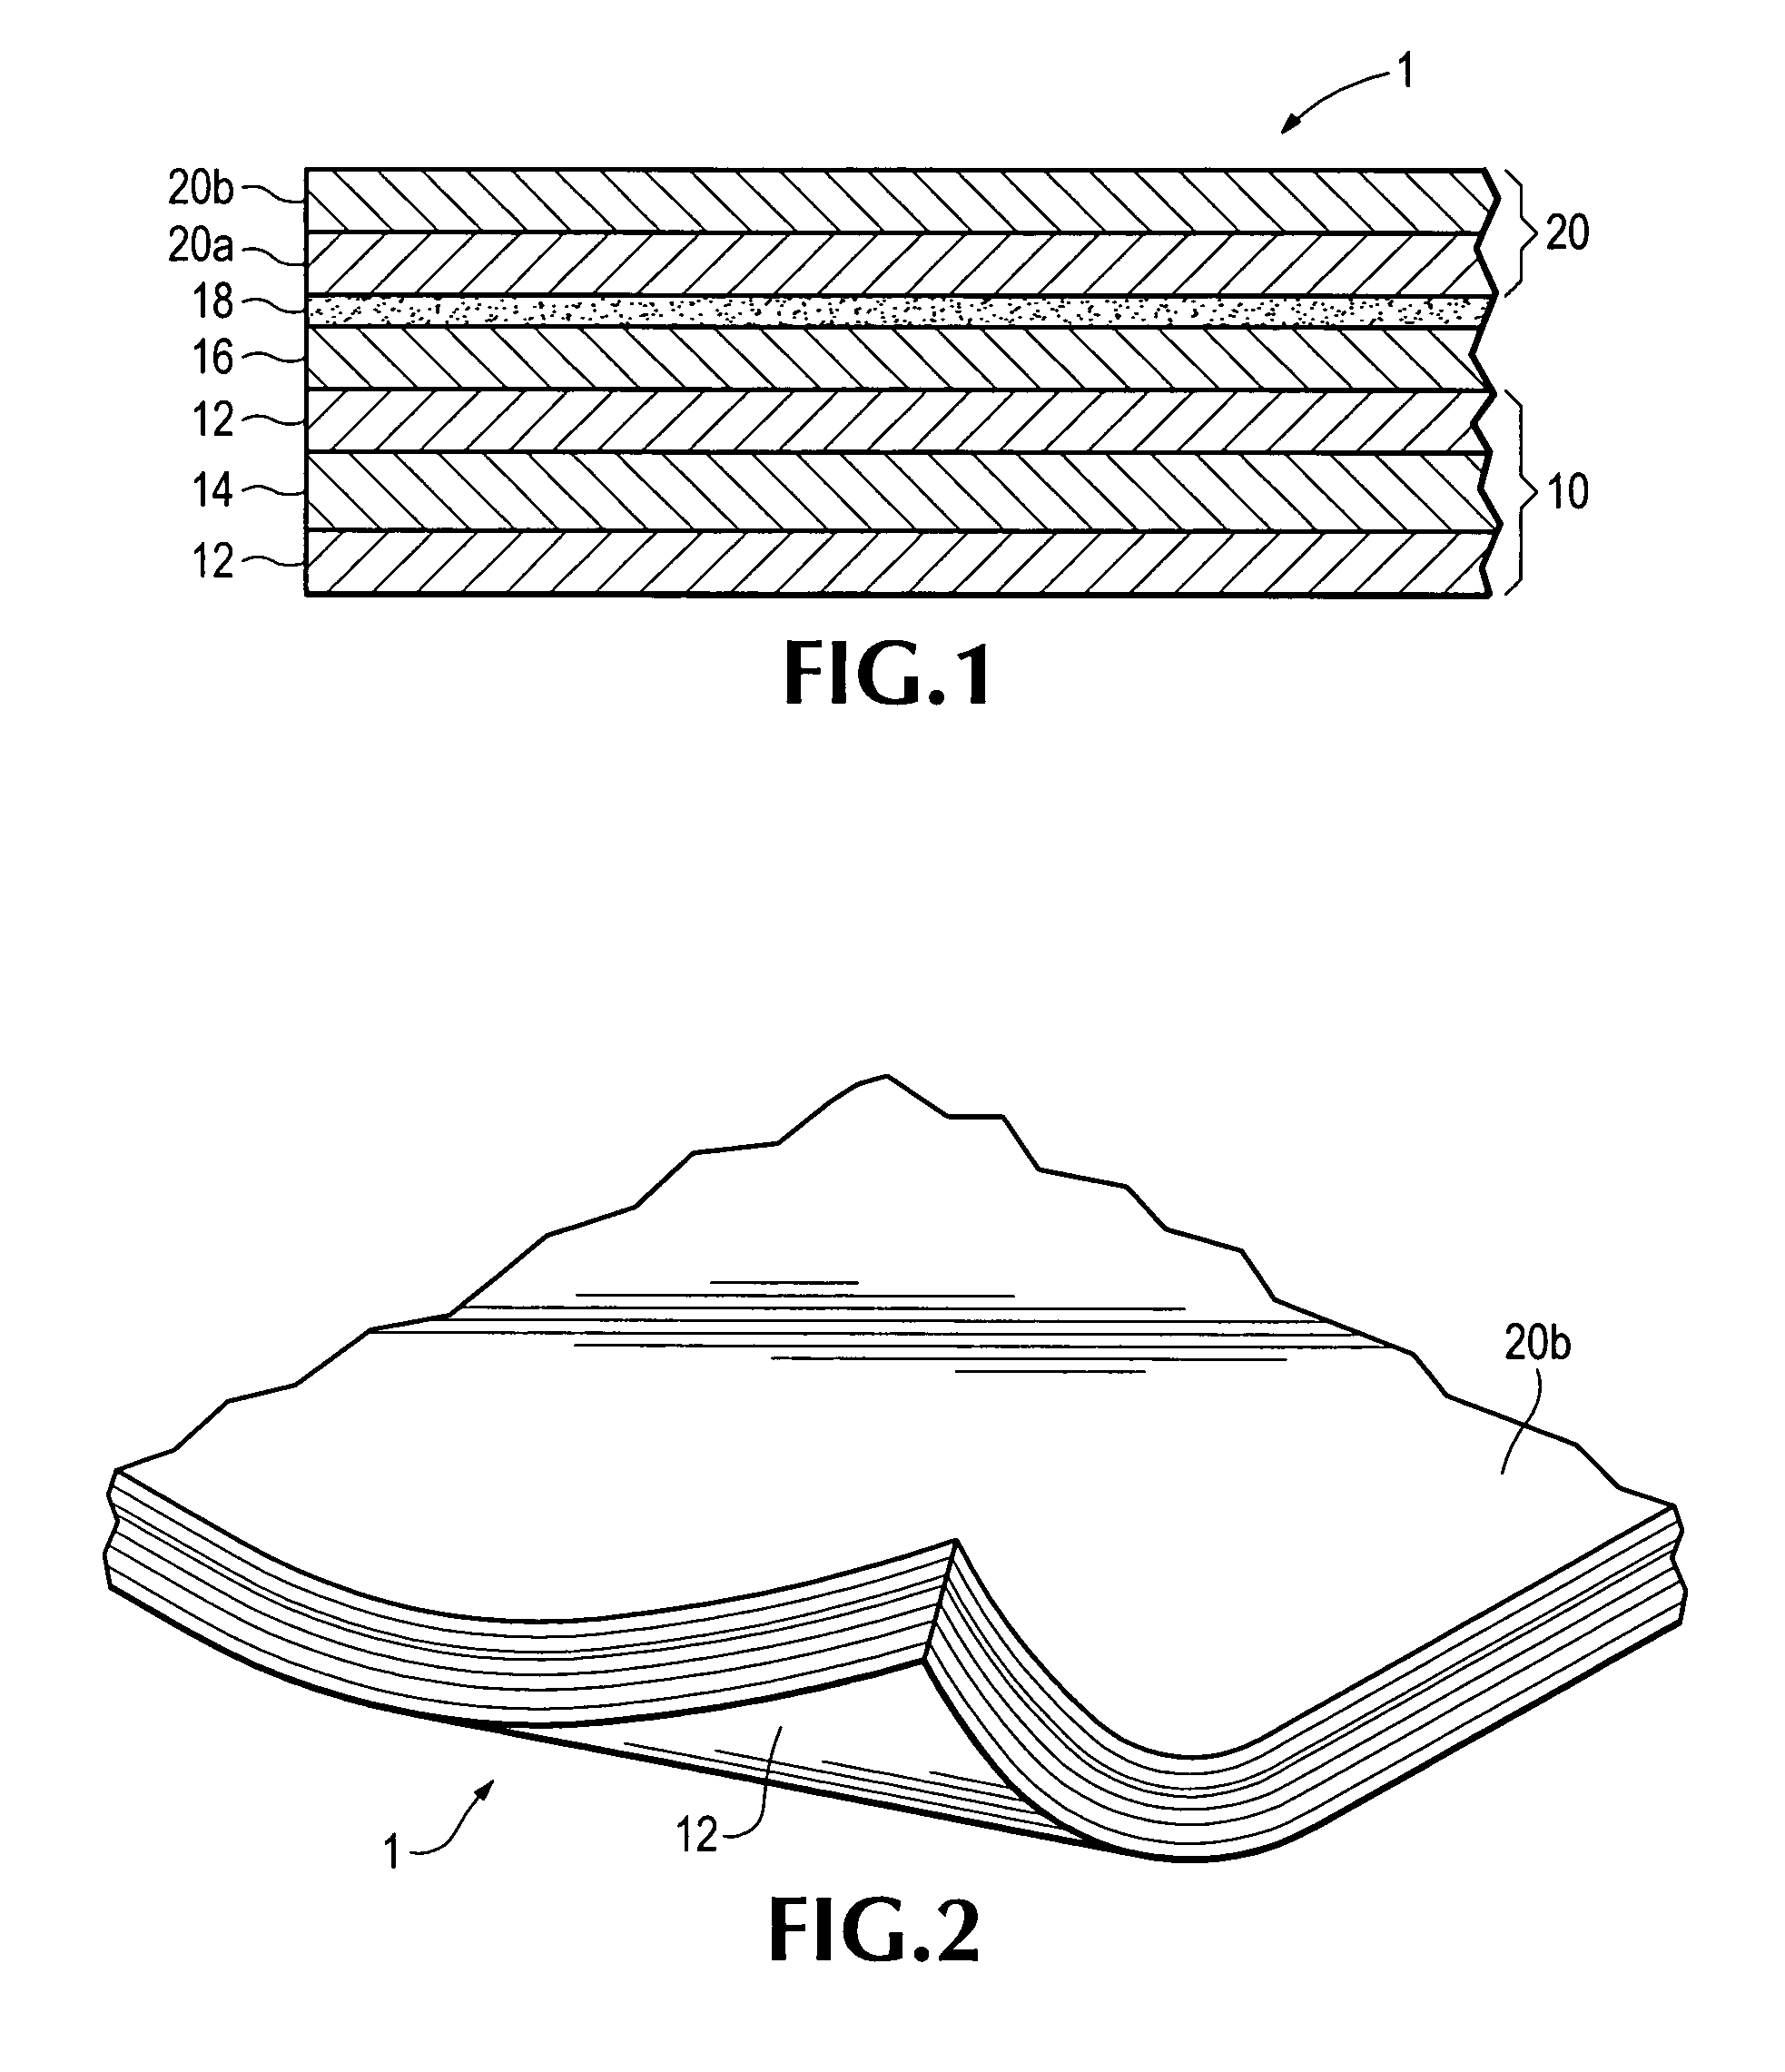 Method of securing flexible solar panel to PVC roofing membrane